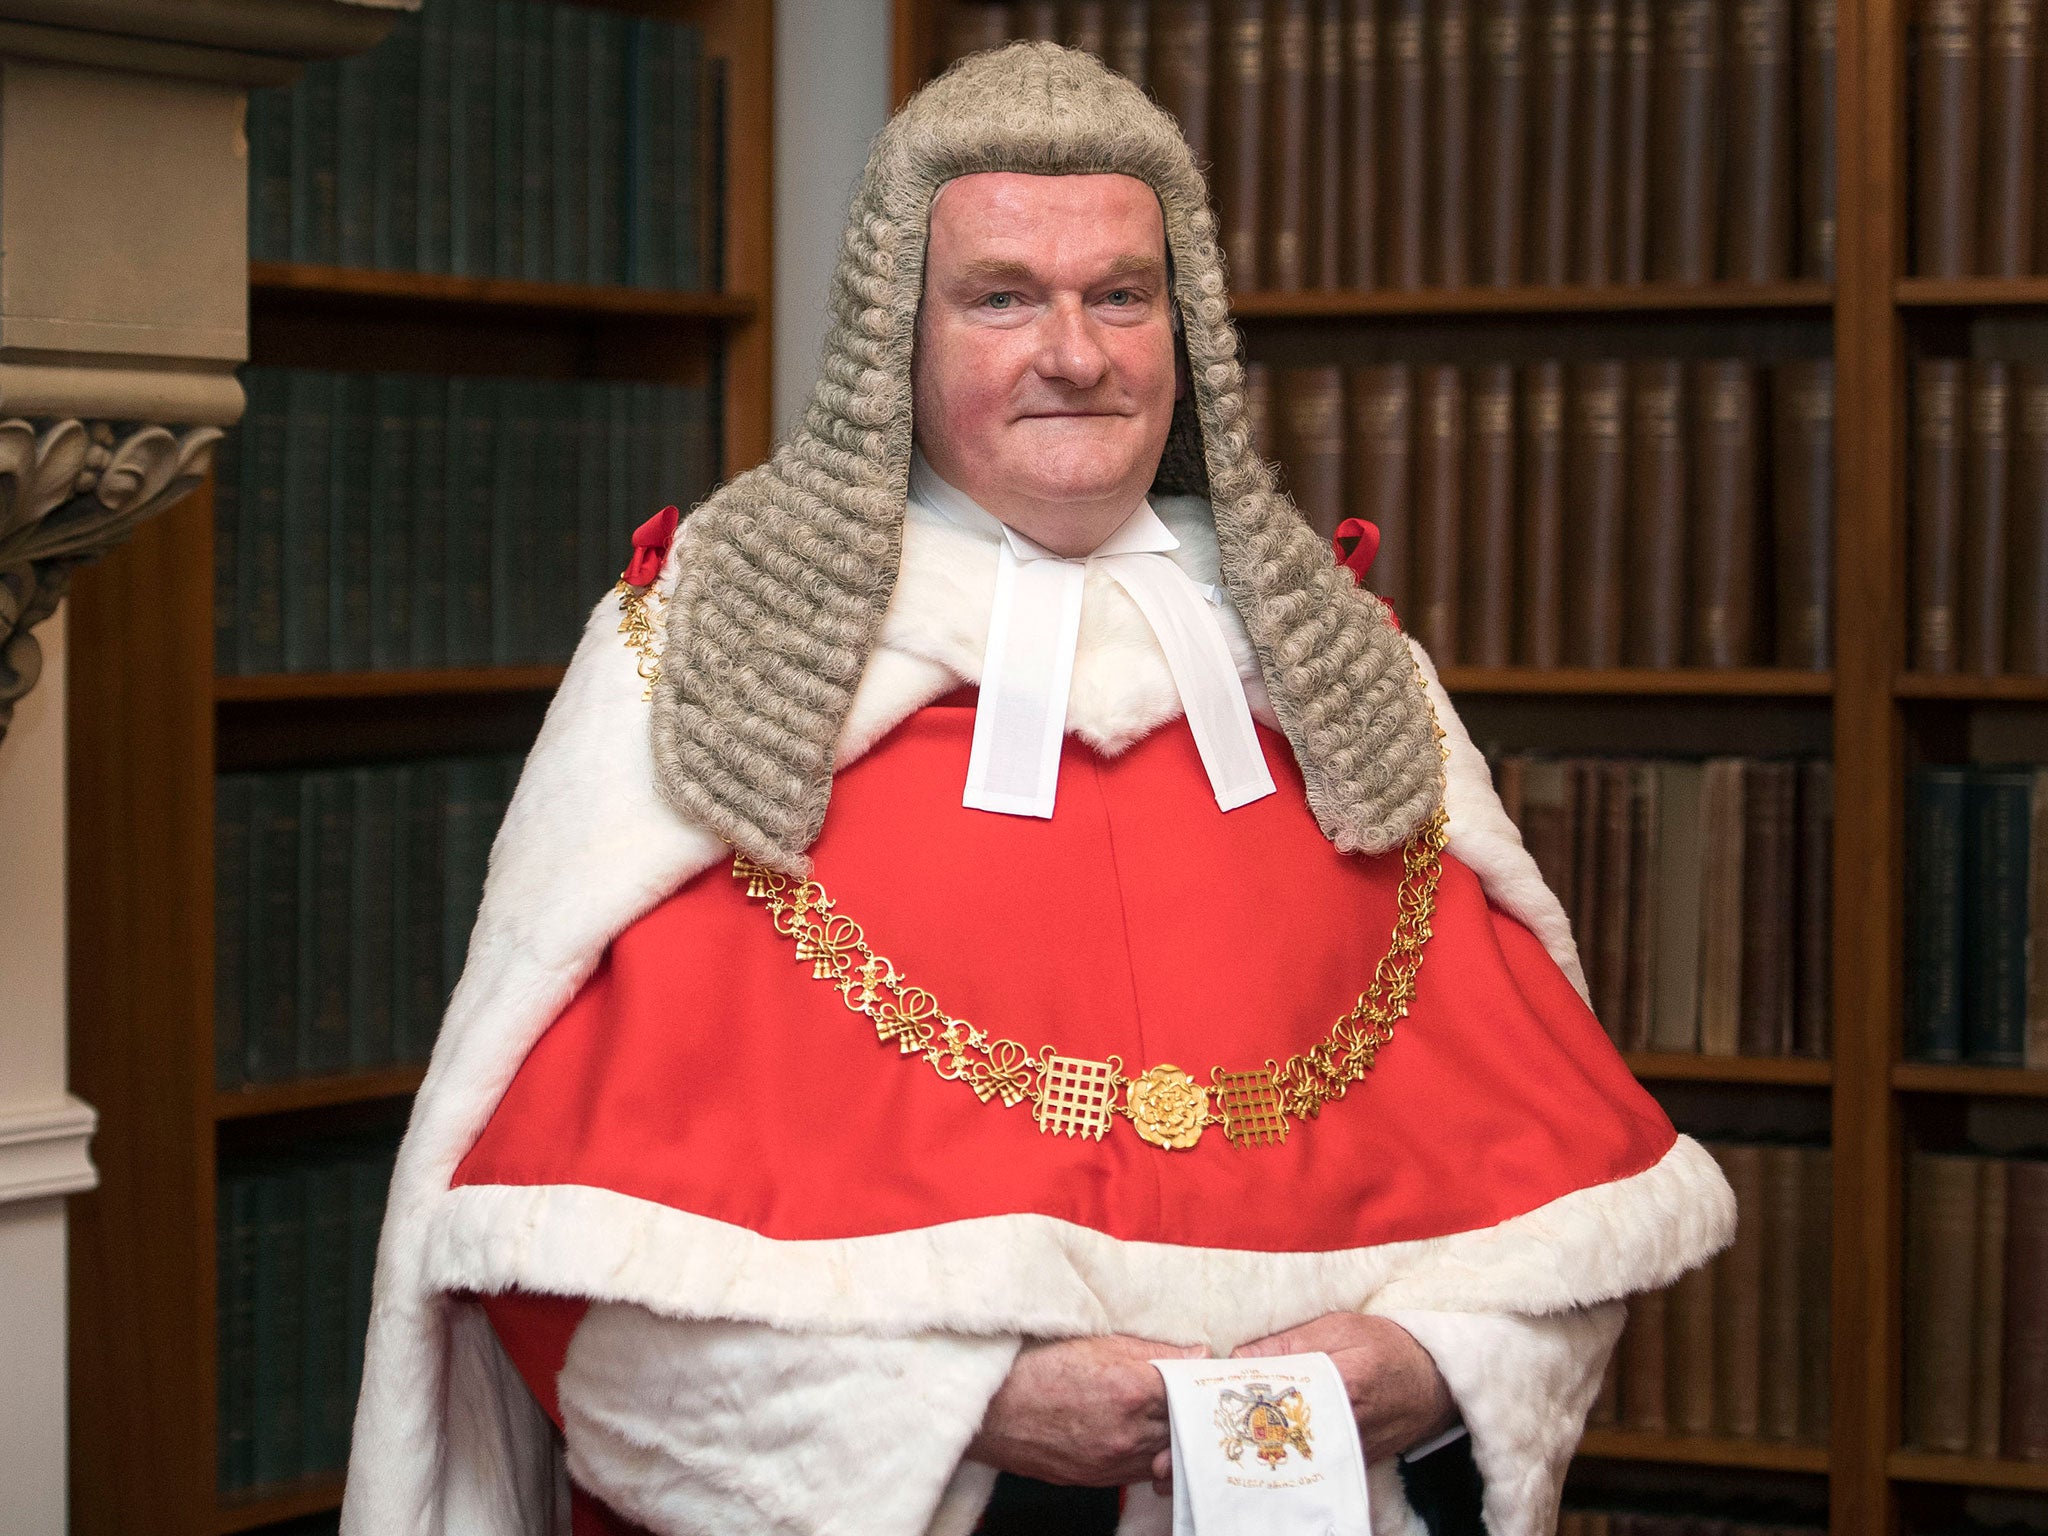 The lord chief justice supports the change